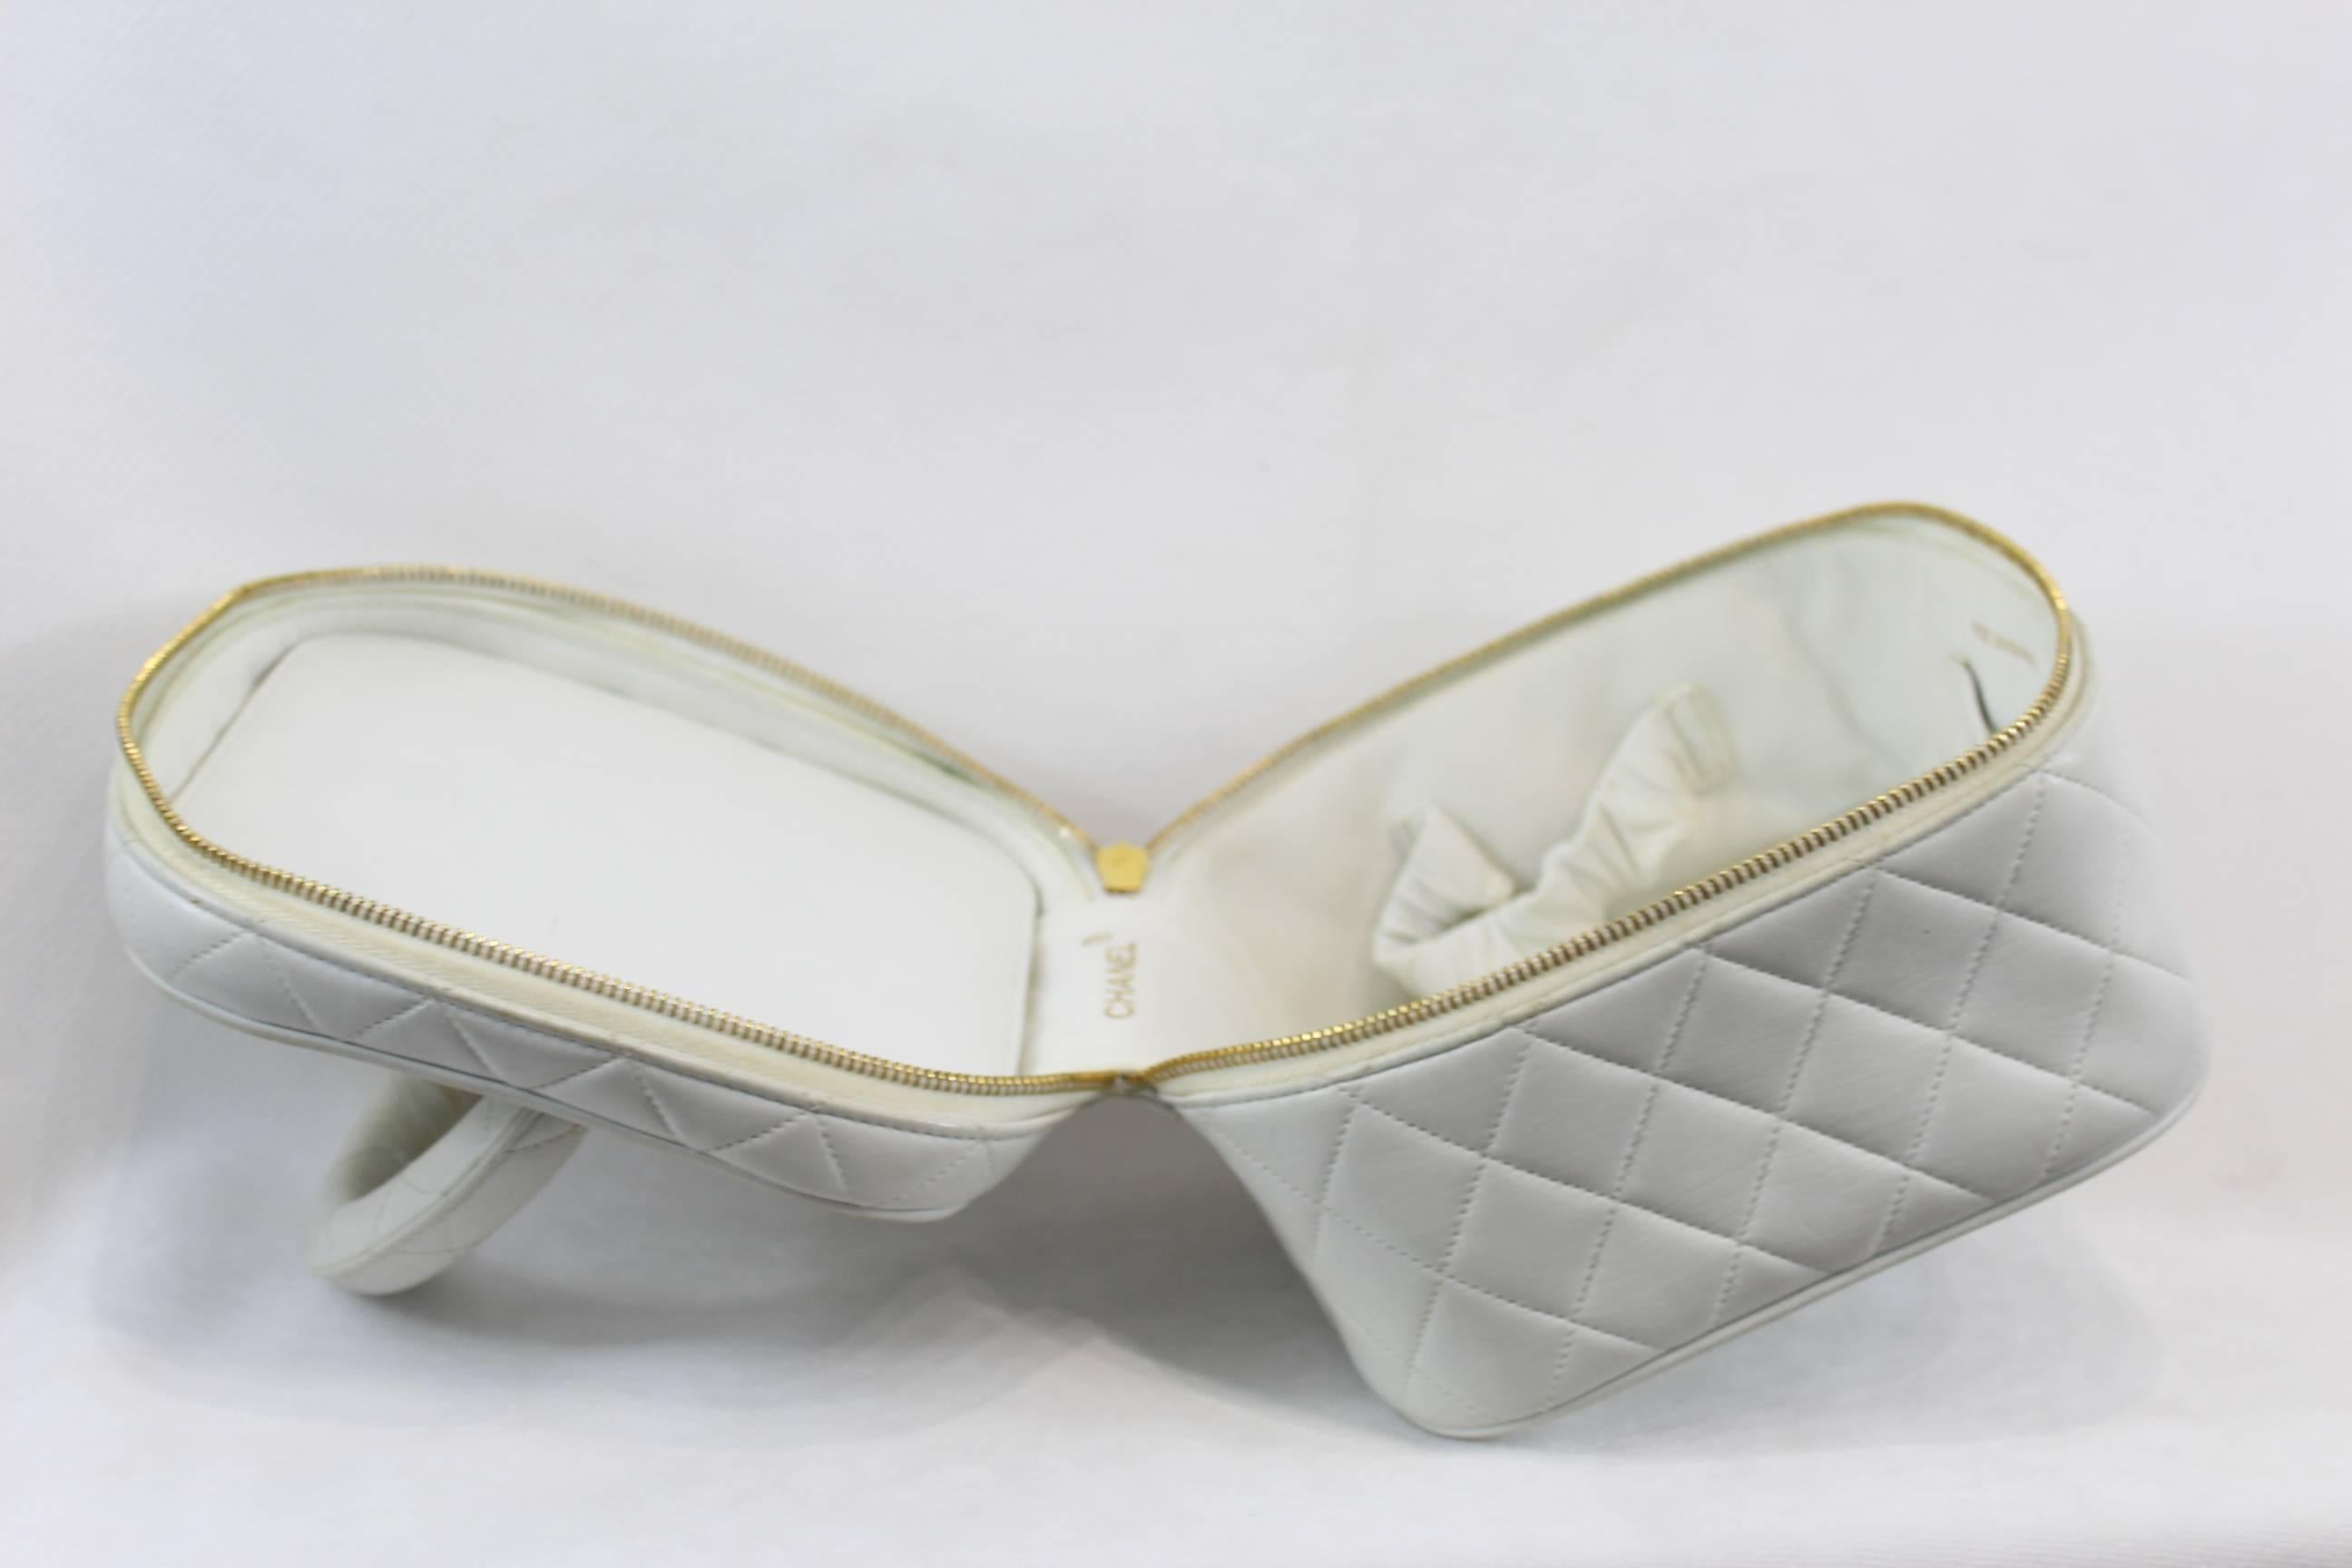 Vintage Chanel white leather vanity case in soft white leather. closing by zip.
Fair condition, signs of wear in the leather